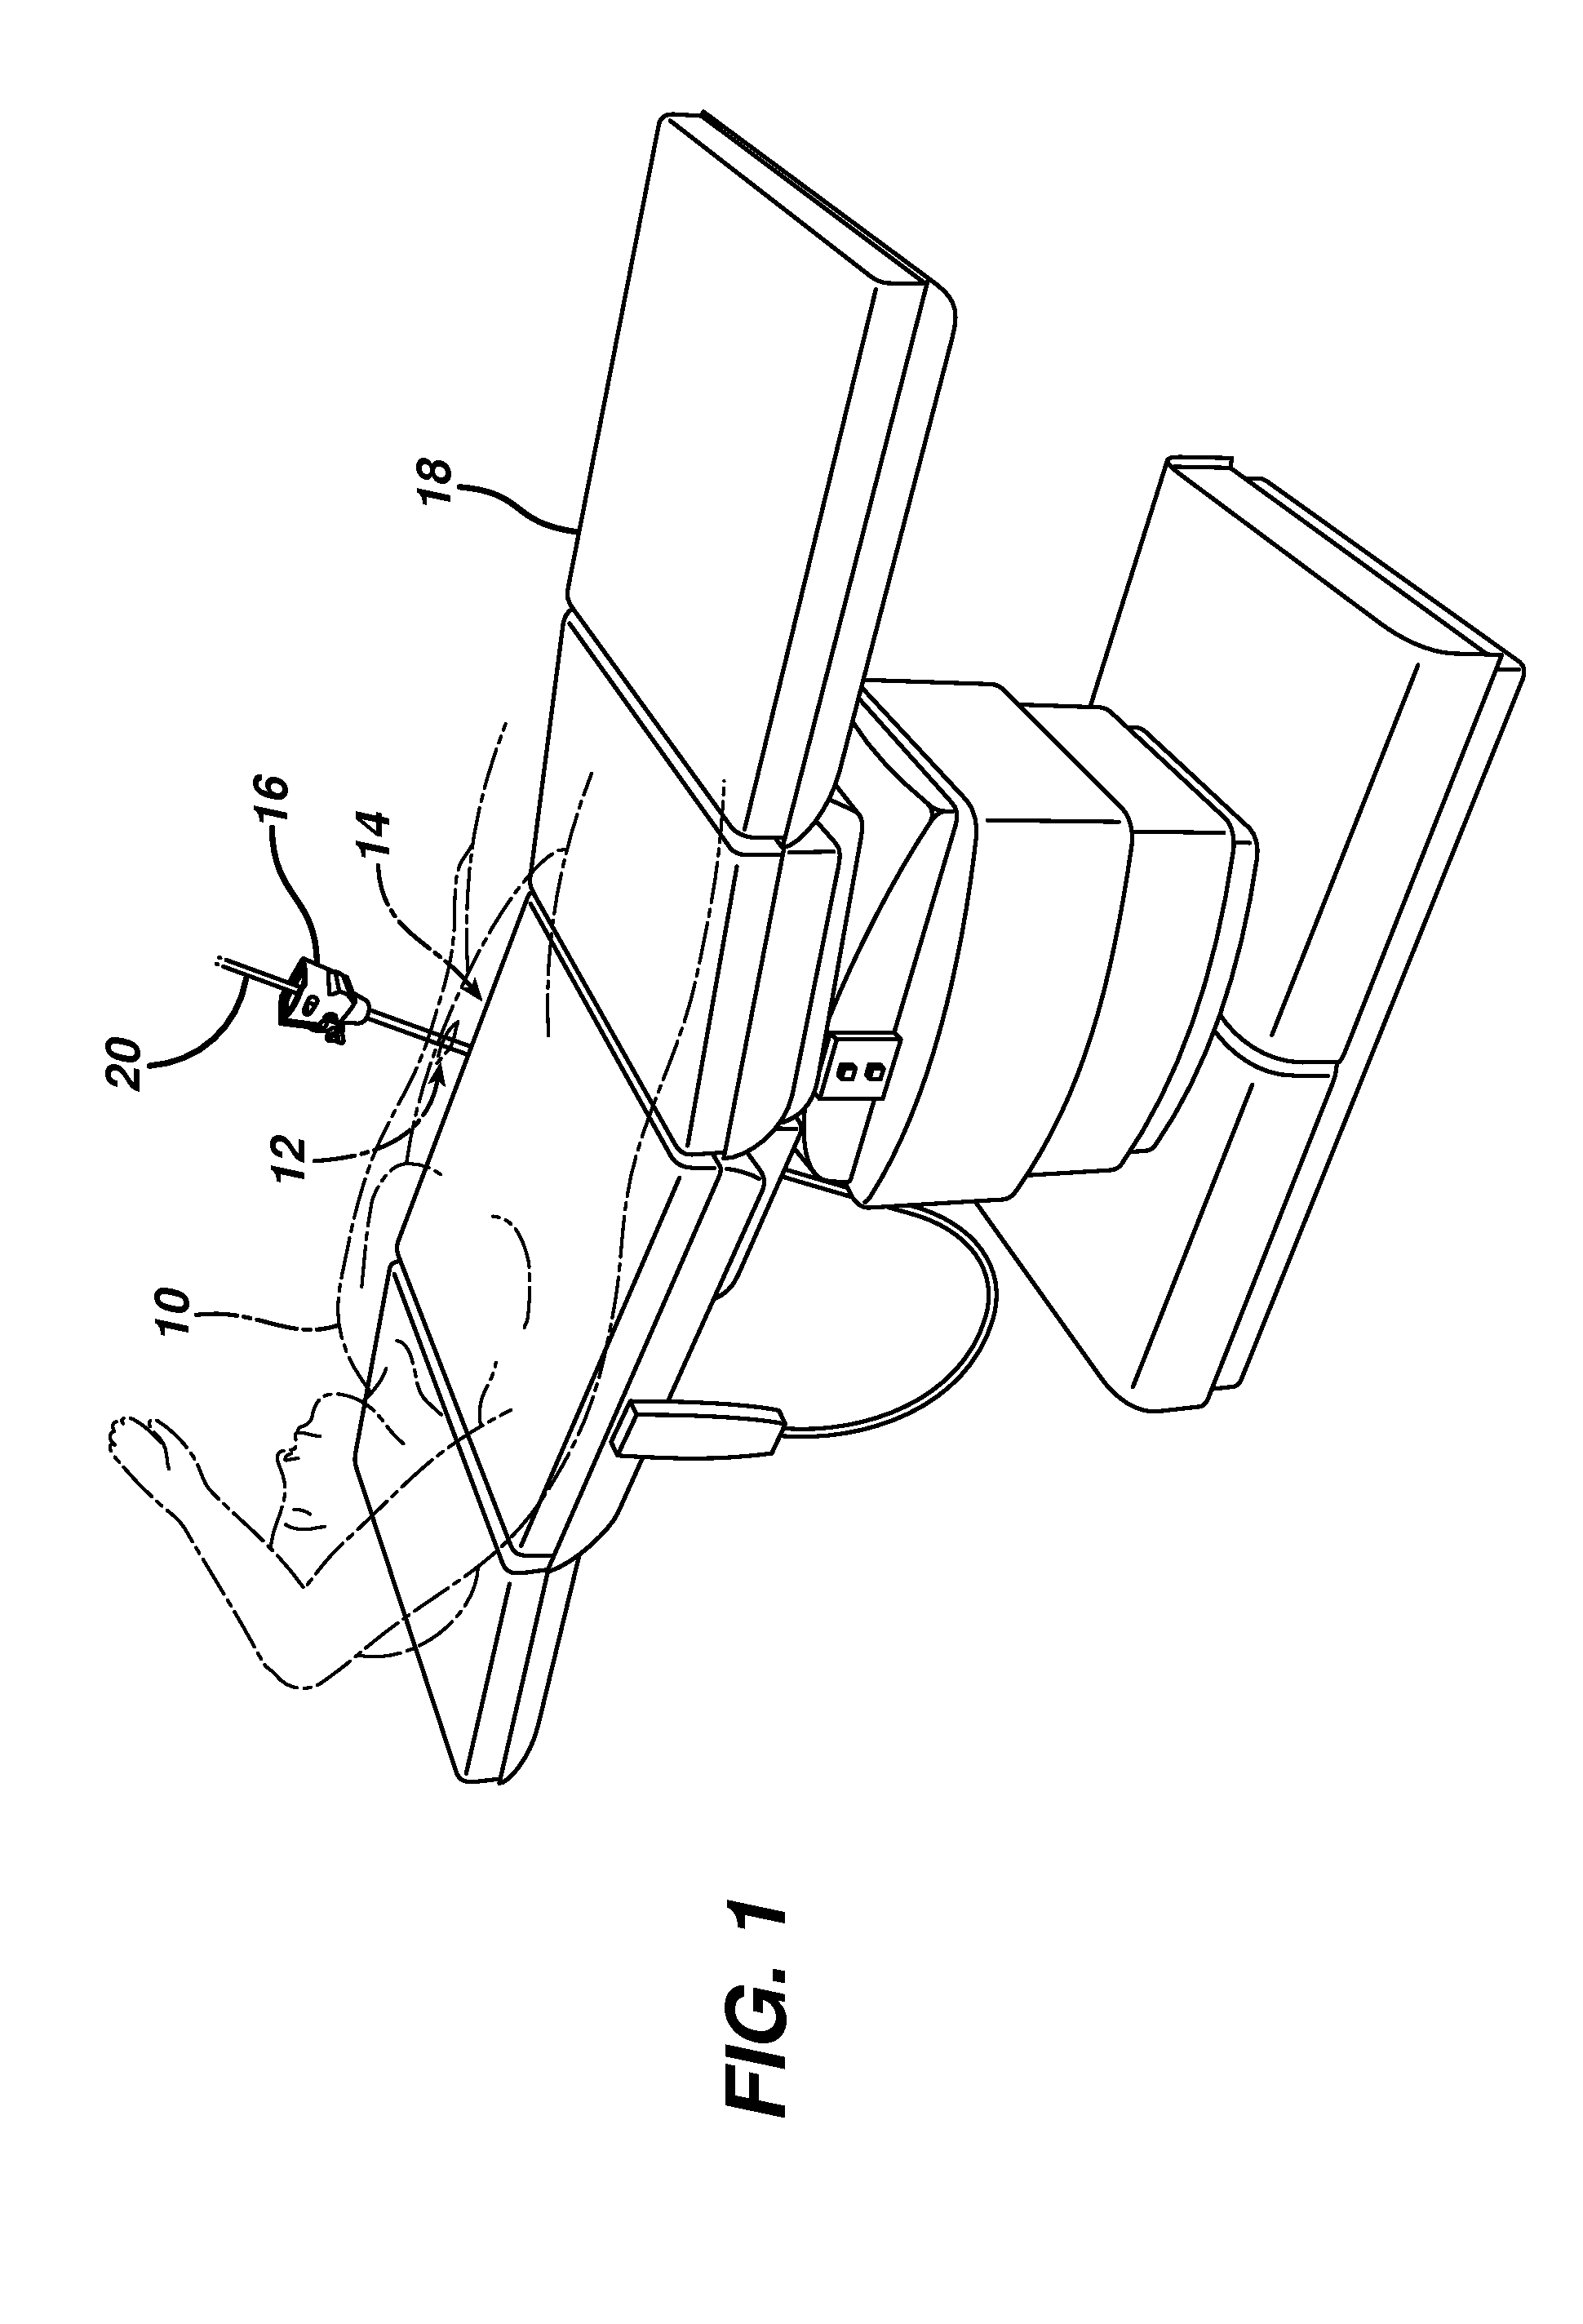 Methods and devices for performing gastrectomies and gastroplasties